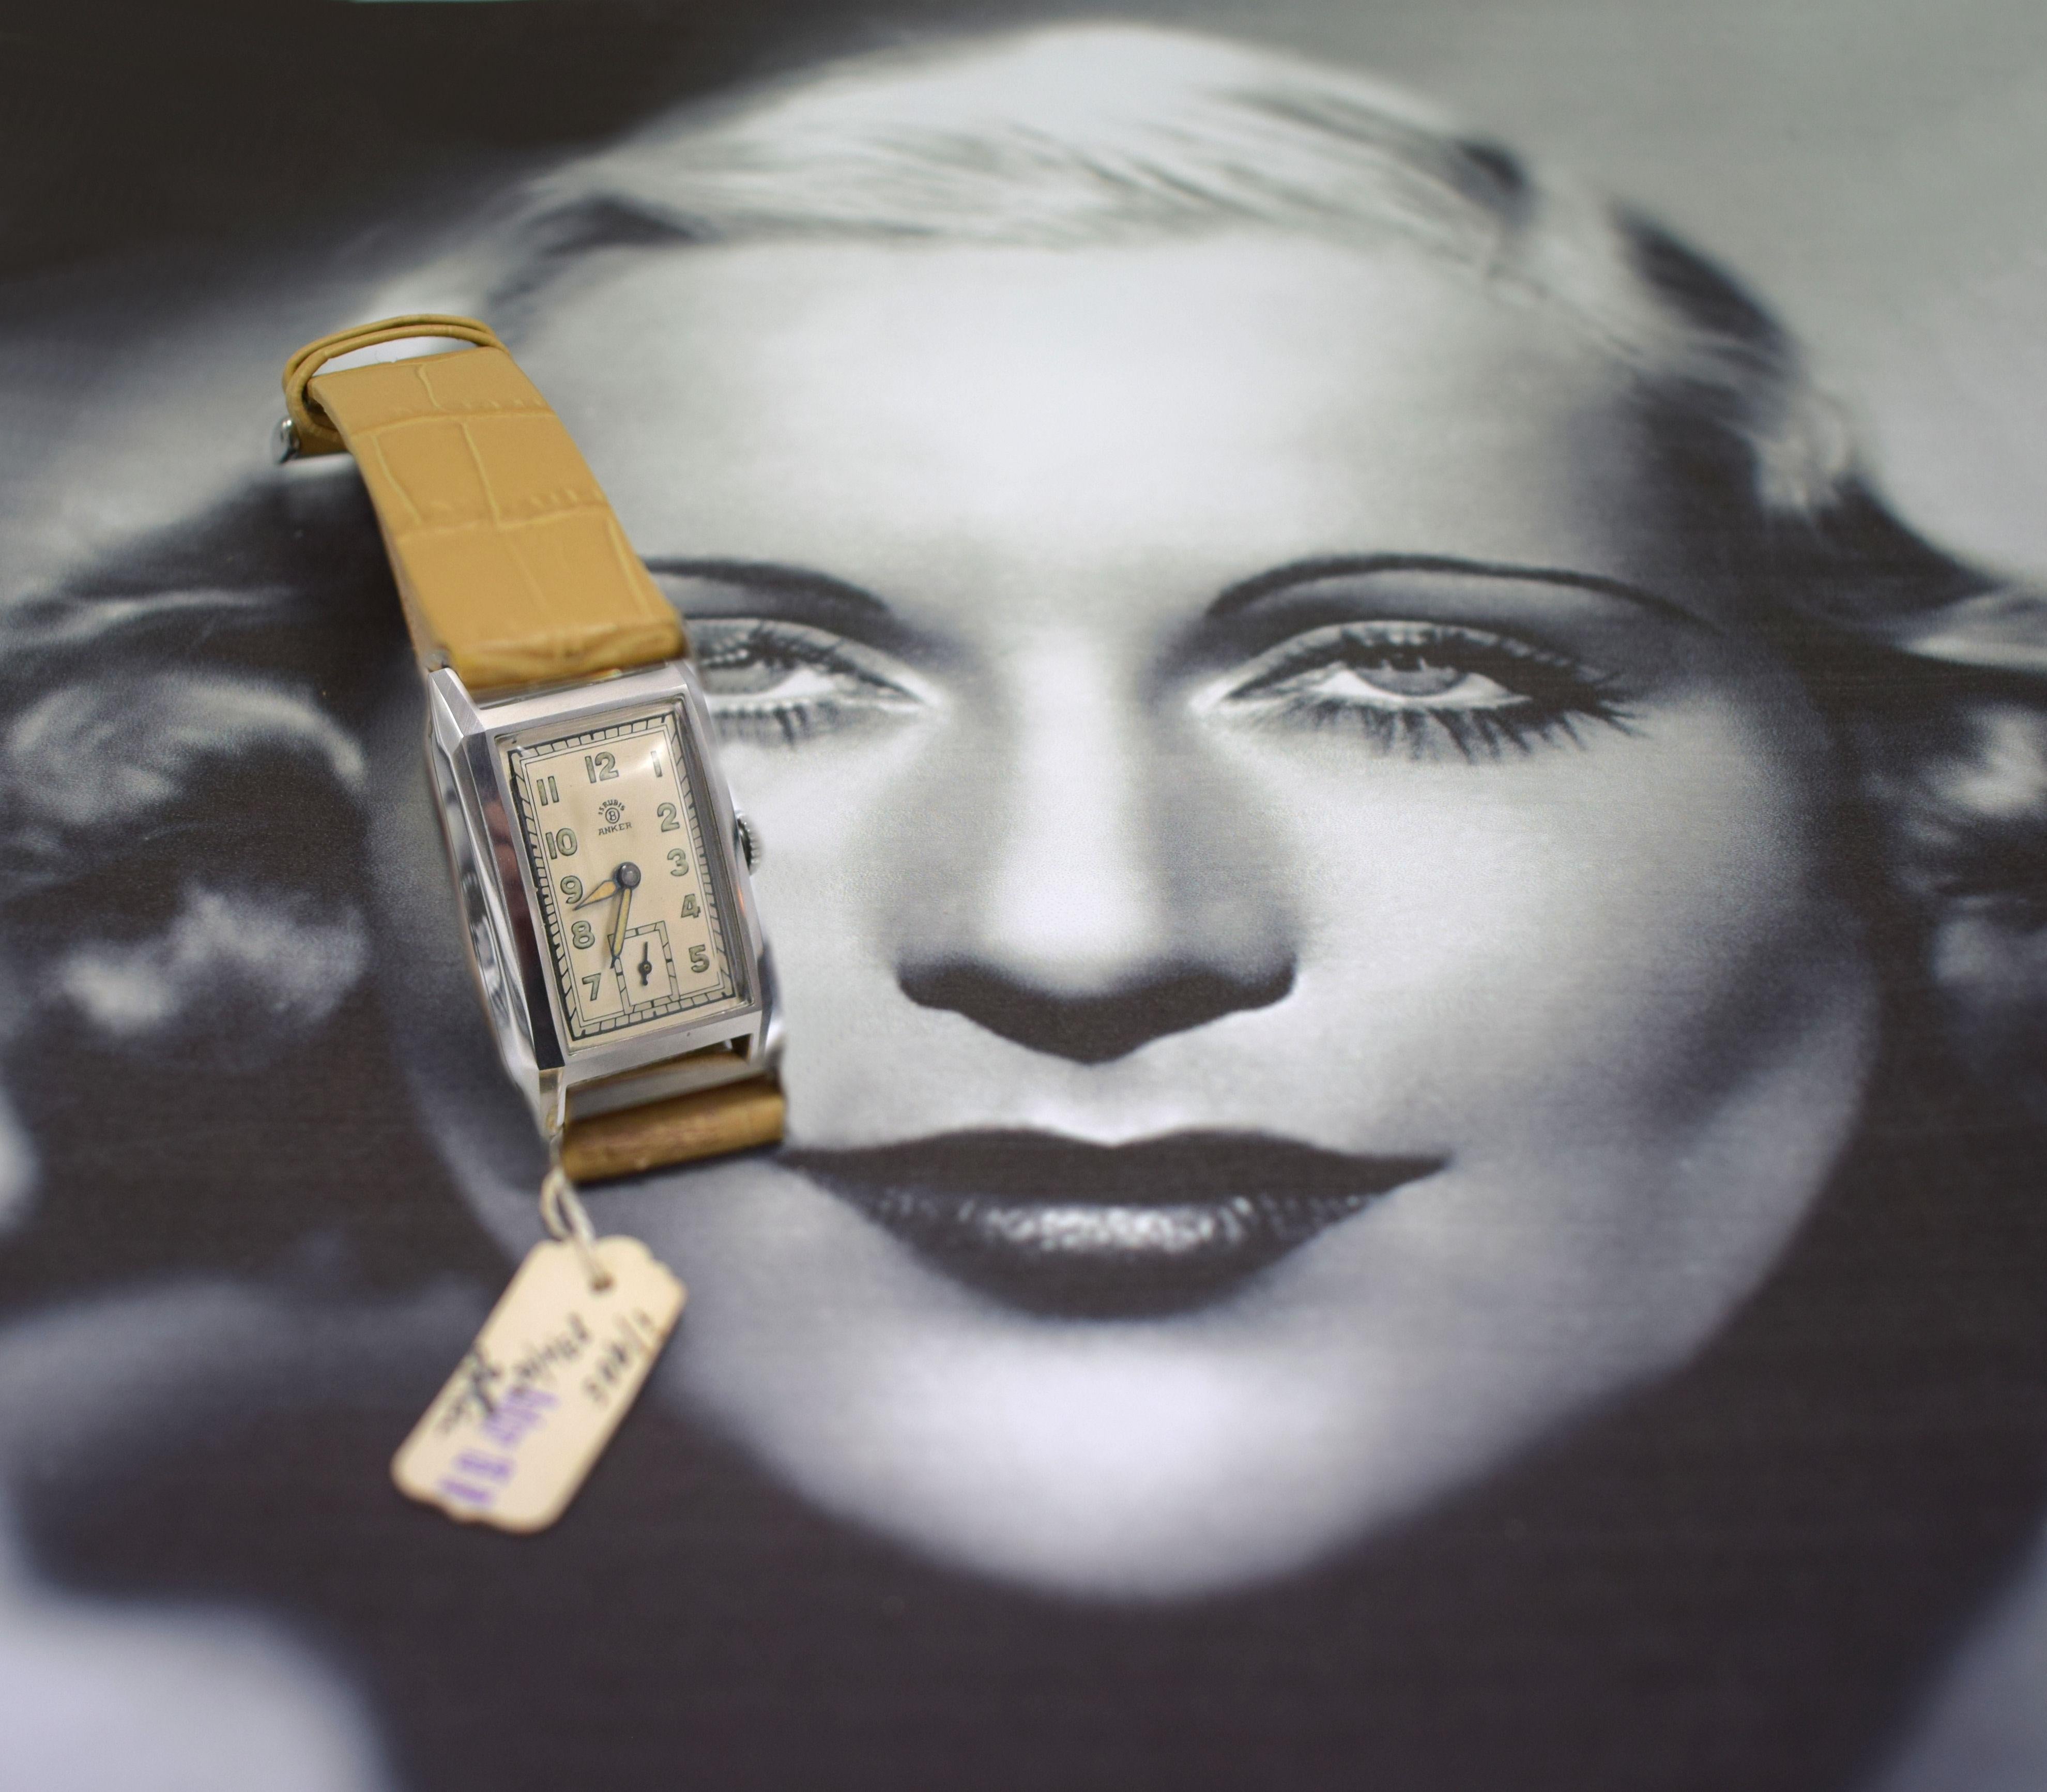 This watch is the last wave of Art Deco watches we sourced this year, an incredible find of old/new watches dating from the 1930's. Never been sold, marketed or worn, In this condition, watches from those years are unique and extremely difficult to